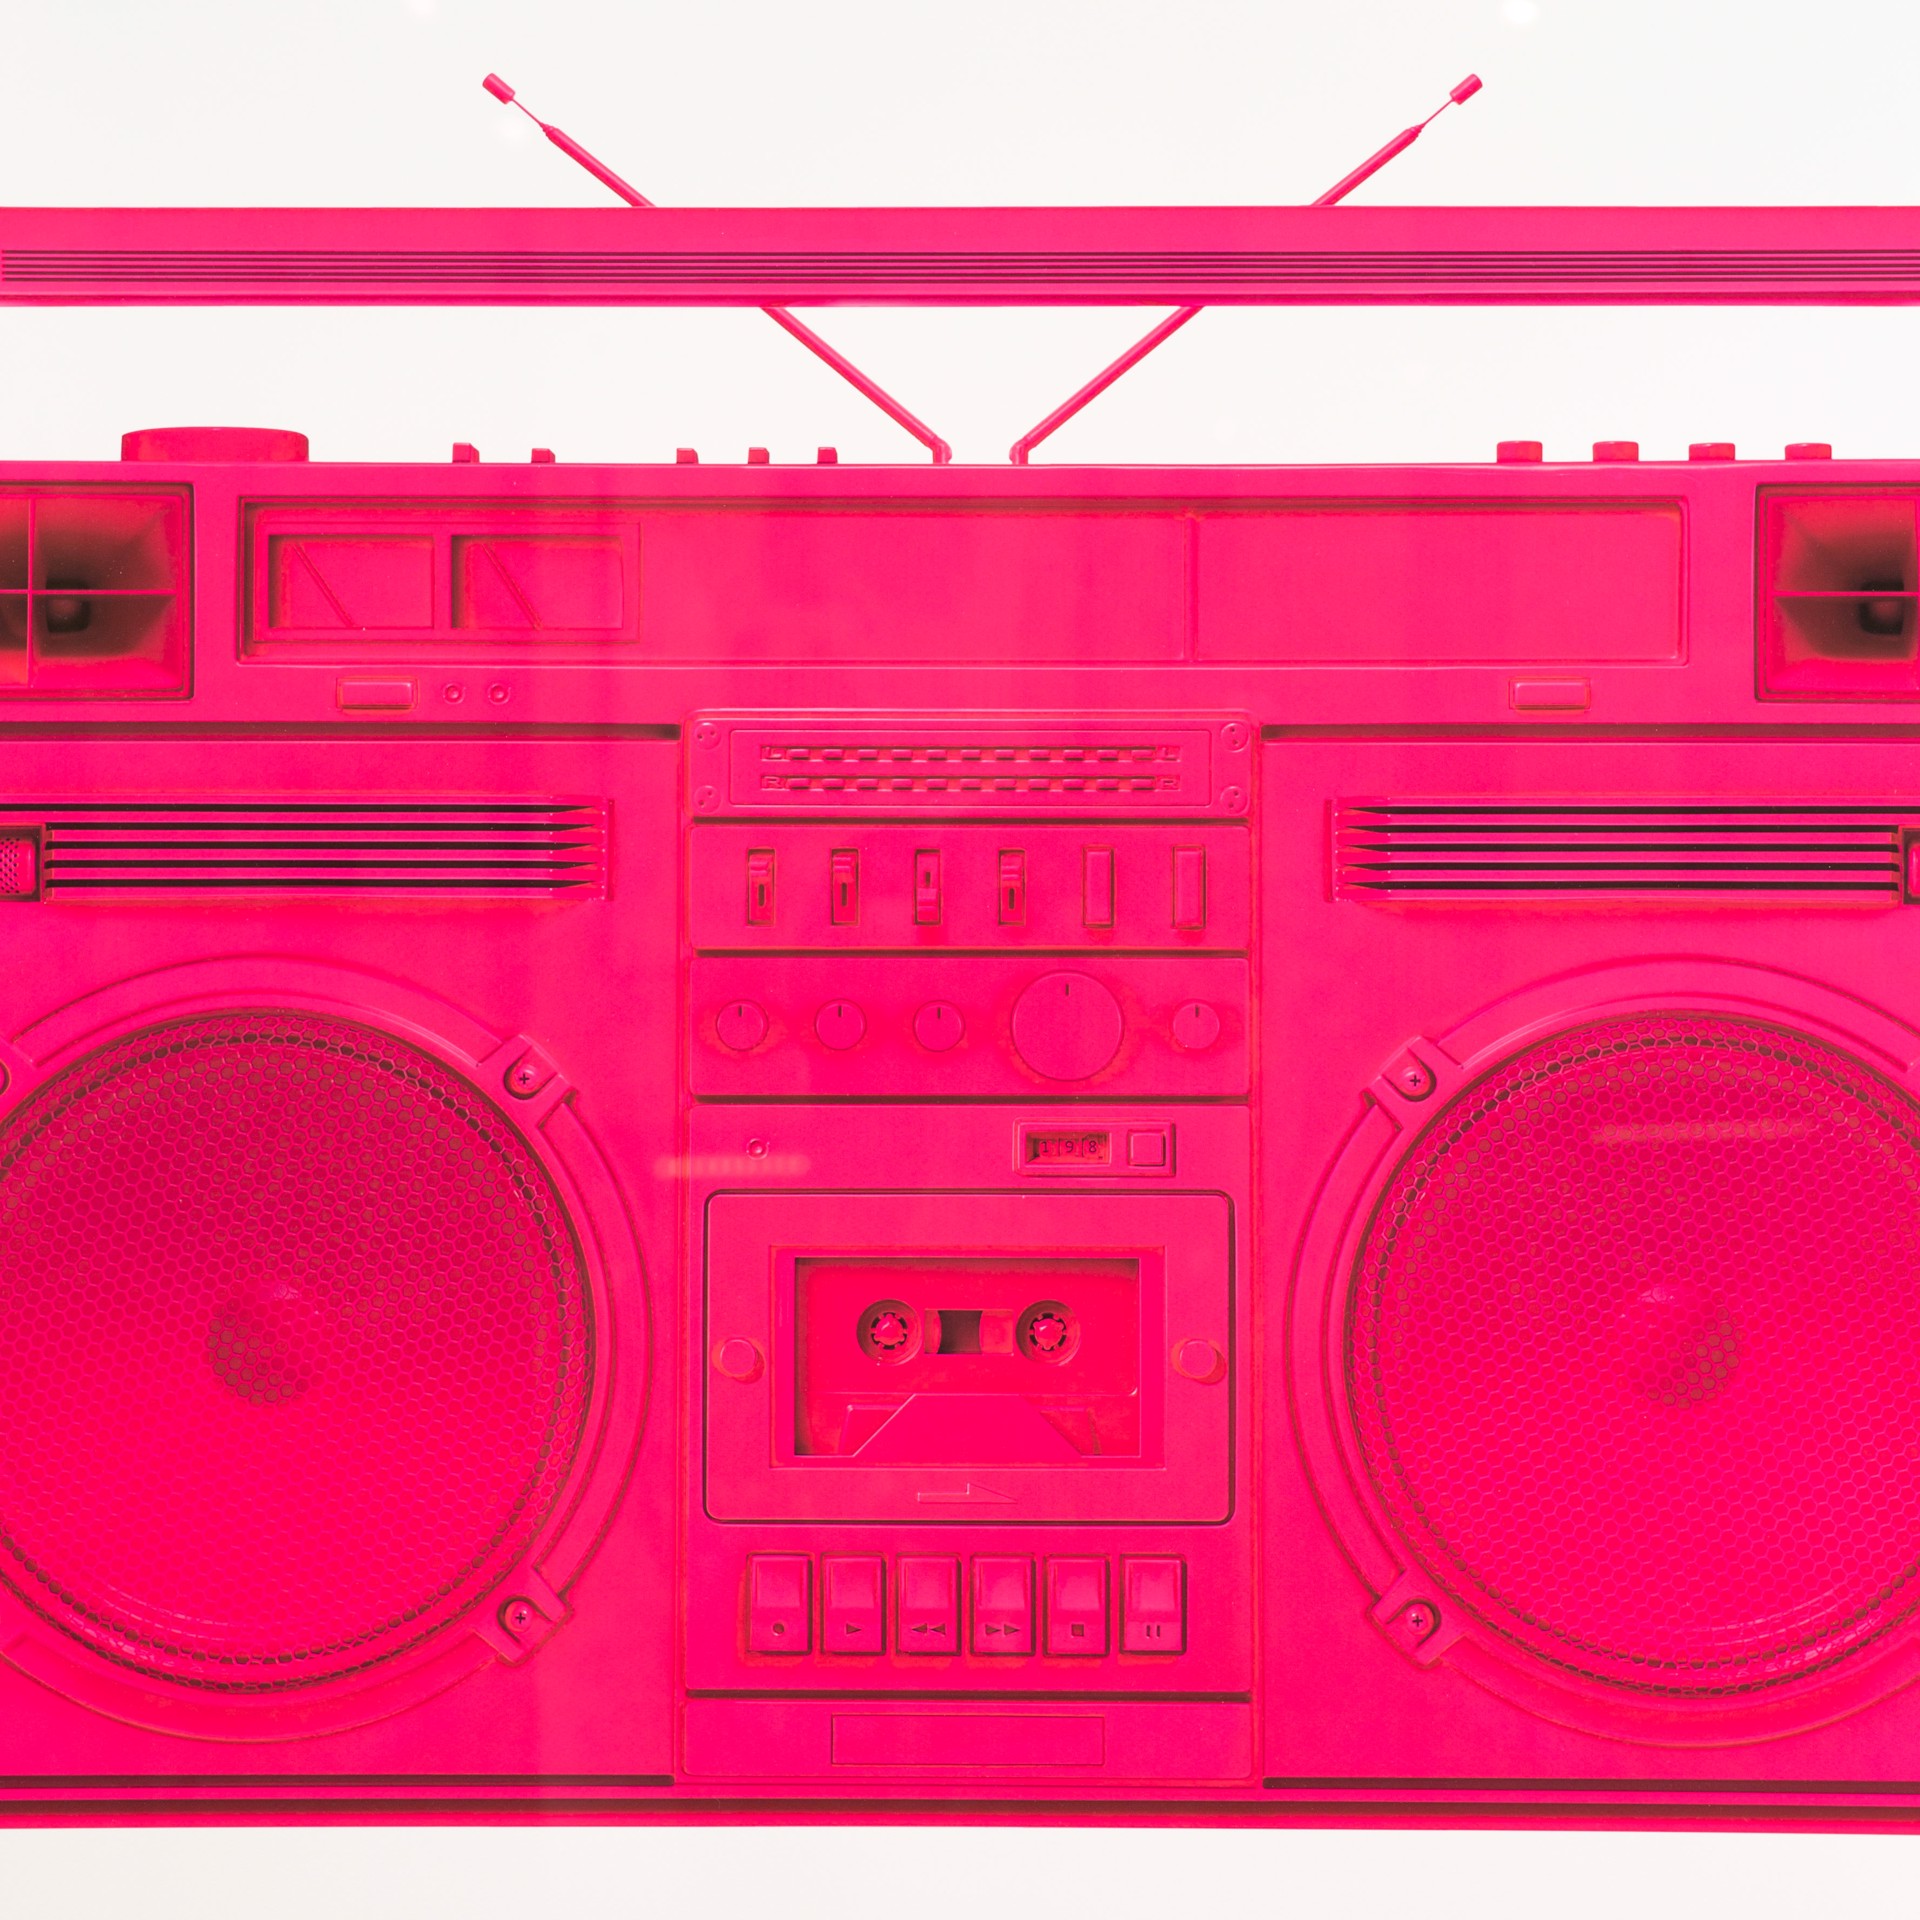 Boombox Sculpture series Size D, Pink, 2019 by Lyle Owerko | Boomboxes